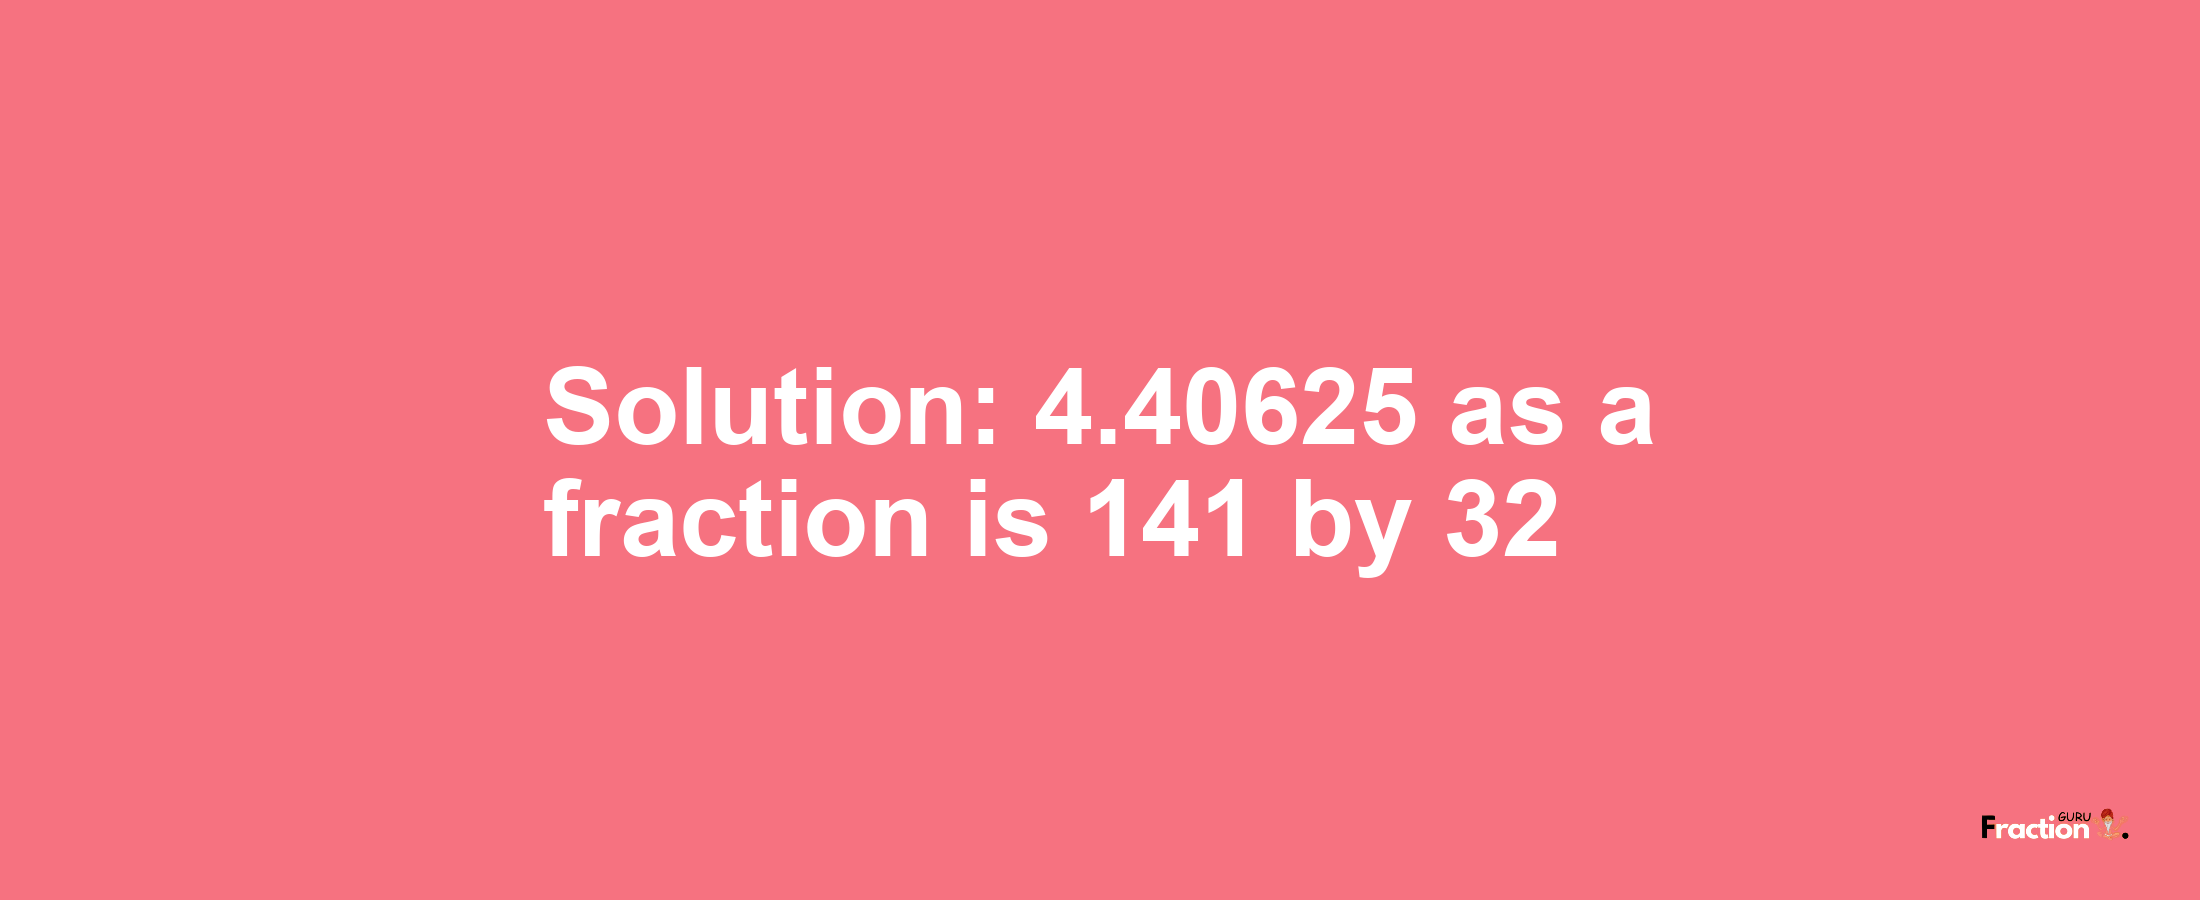 Solution:4.40625 as a fraction is 141/32